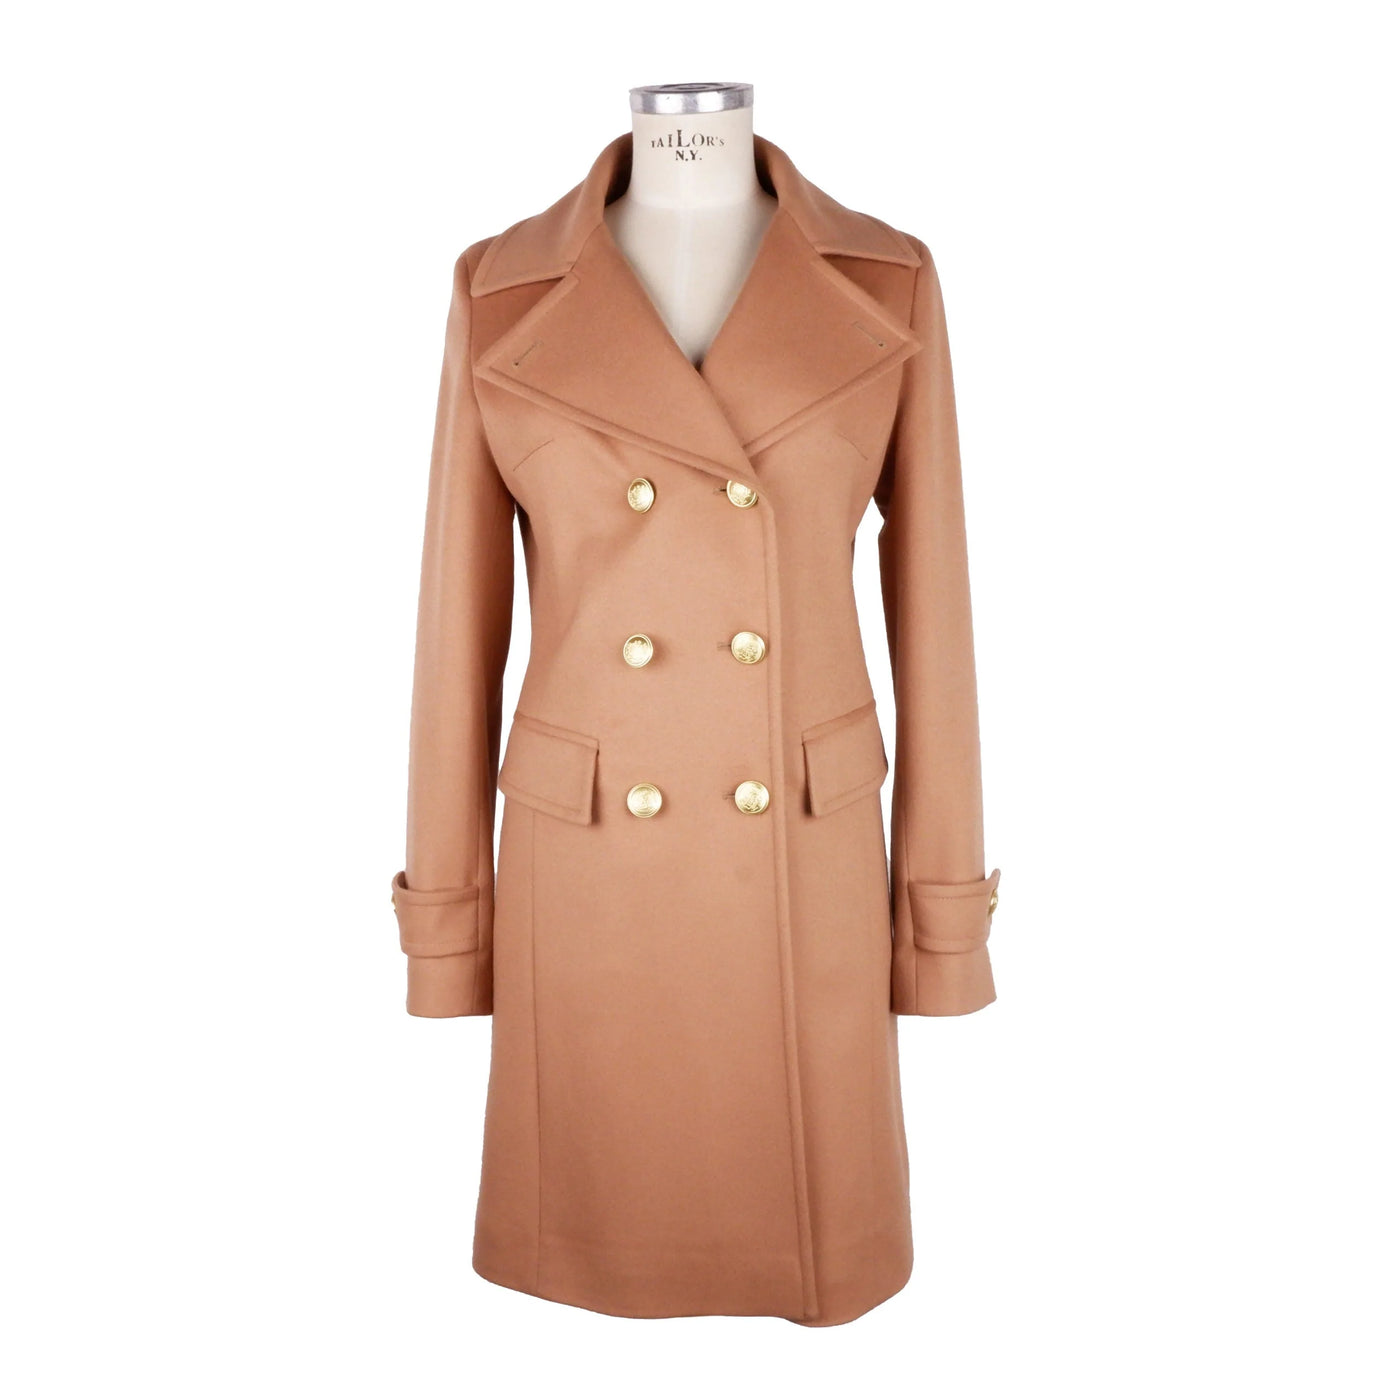 Made in Italy Brown Wool Jackets & Coat Brown, feed-1, IT44|L, IT46 | L, IT48 | XL, Jackets & Coats - Women - Clothing, Made in Italy at SEYMAYKA